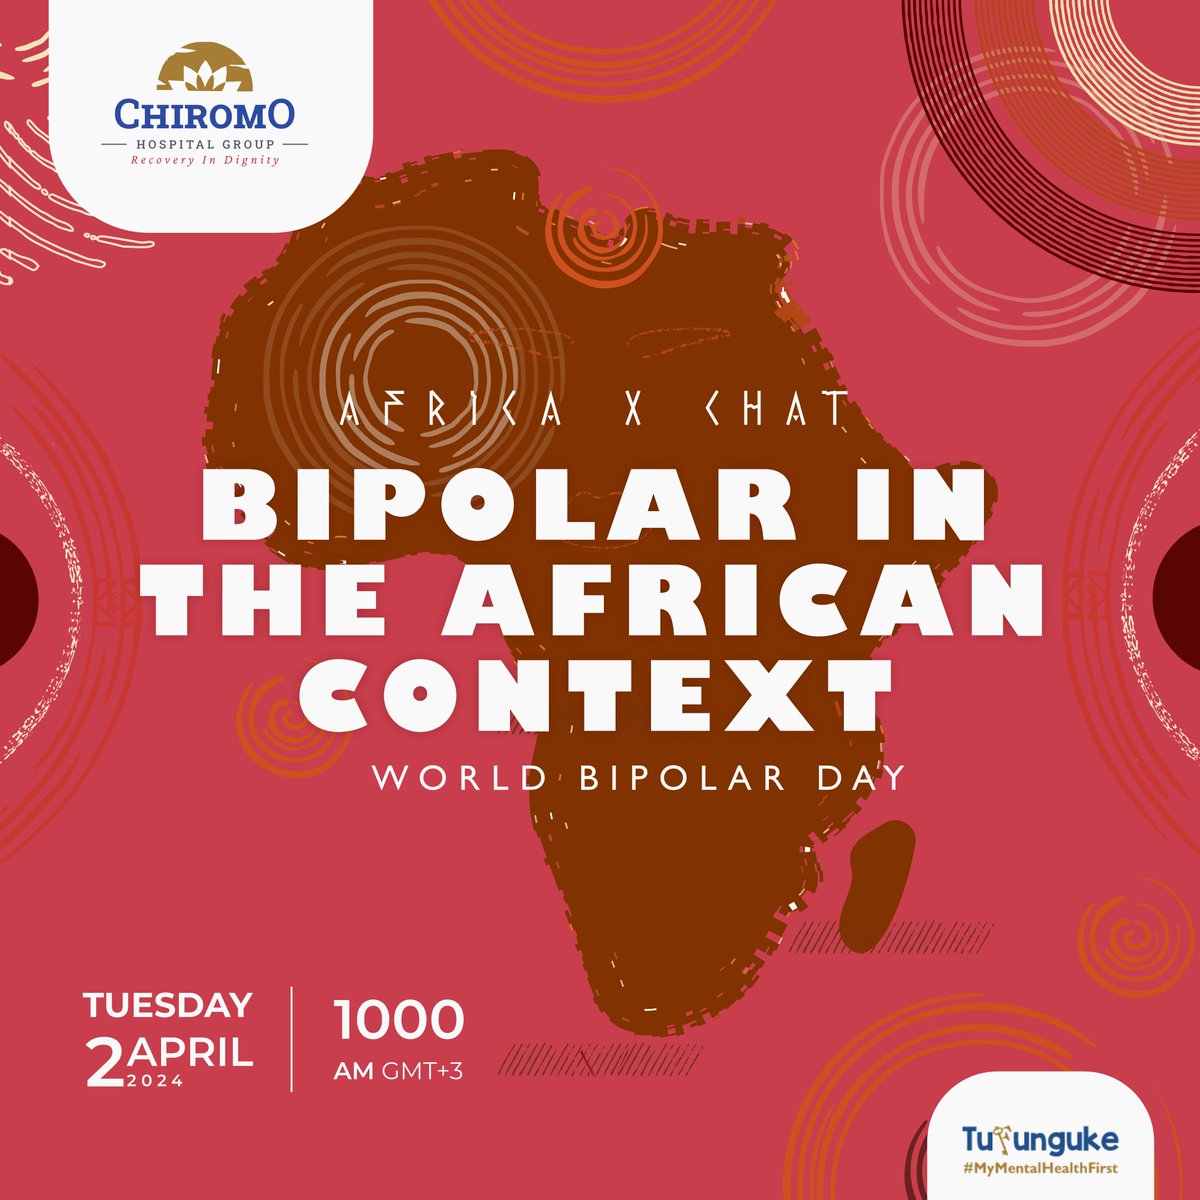 Good Morning AFRICA and Beyond! Welcome to this week's #Africa X Chat, where we get to demistify #mentalhealth Topic of the Day: #Bipolar in the African Context in commemoration of Bipolar Awareness Month. Let's Go!